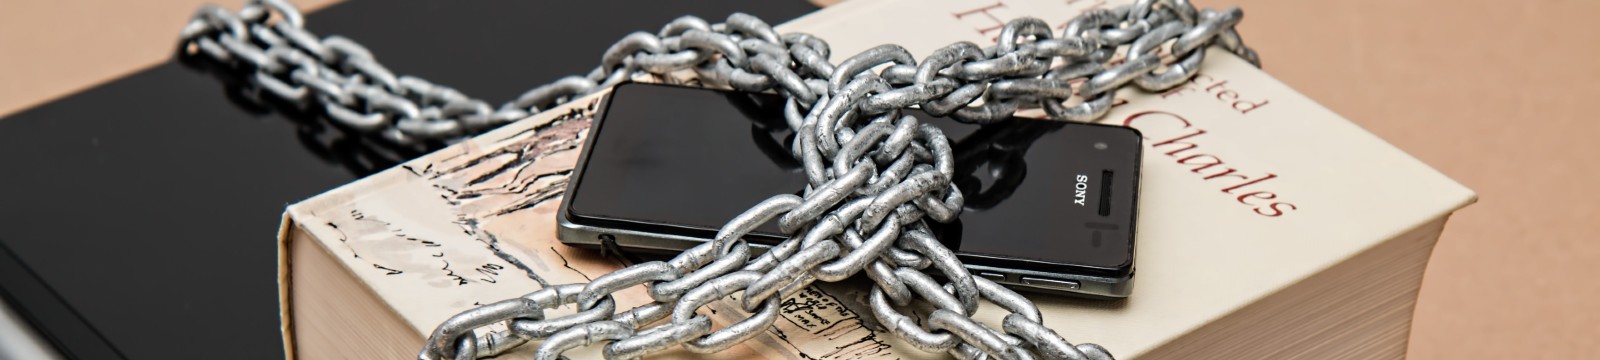 Stock photo of books and cell phone locked down with chains.